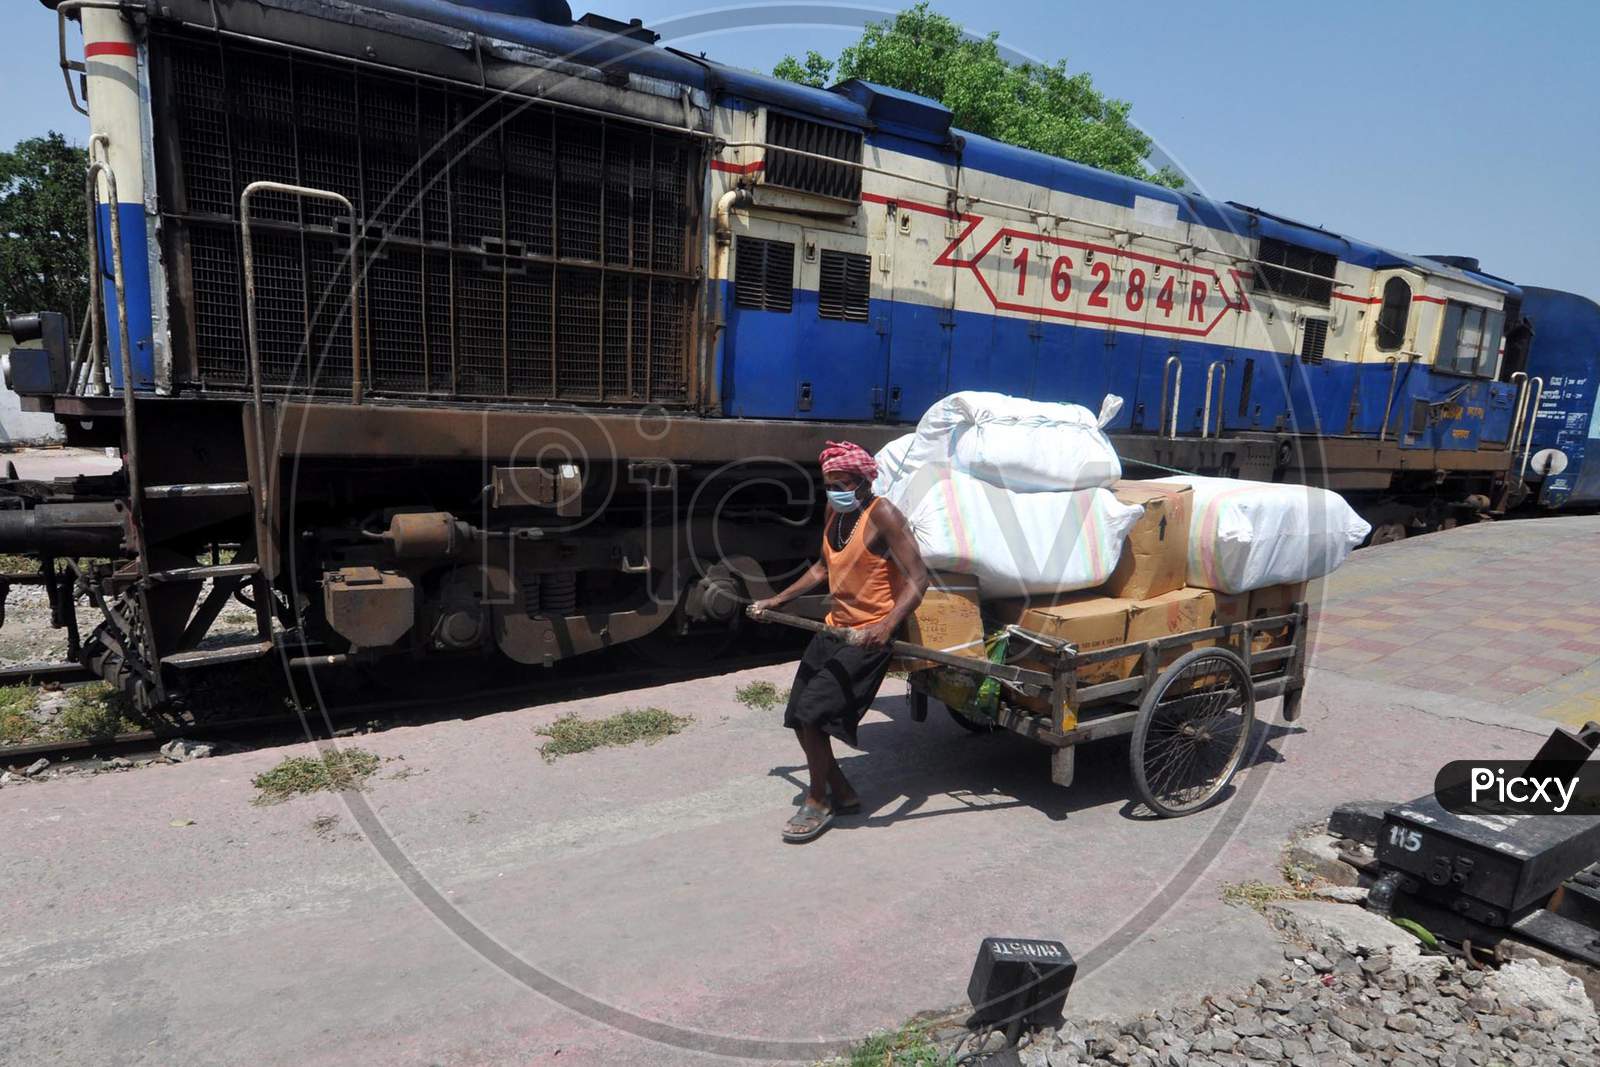 Man Pulling  Loaded  Hand Cart At a Railway station During a Nation Wide Lock down For Corona Virus Or COVID-19 Pandemic In Guwahati, India . April 16,2020